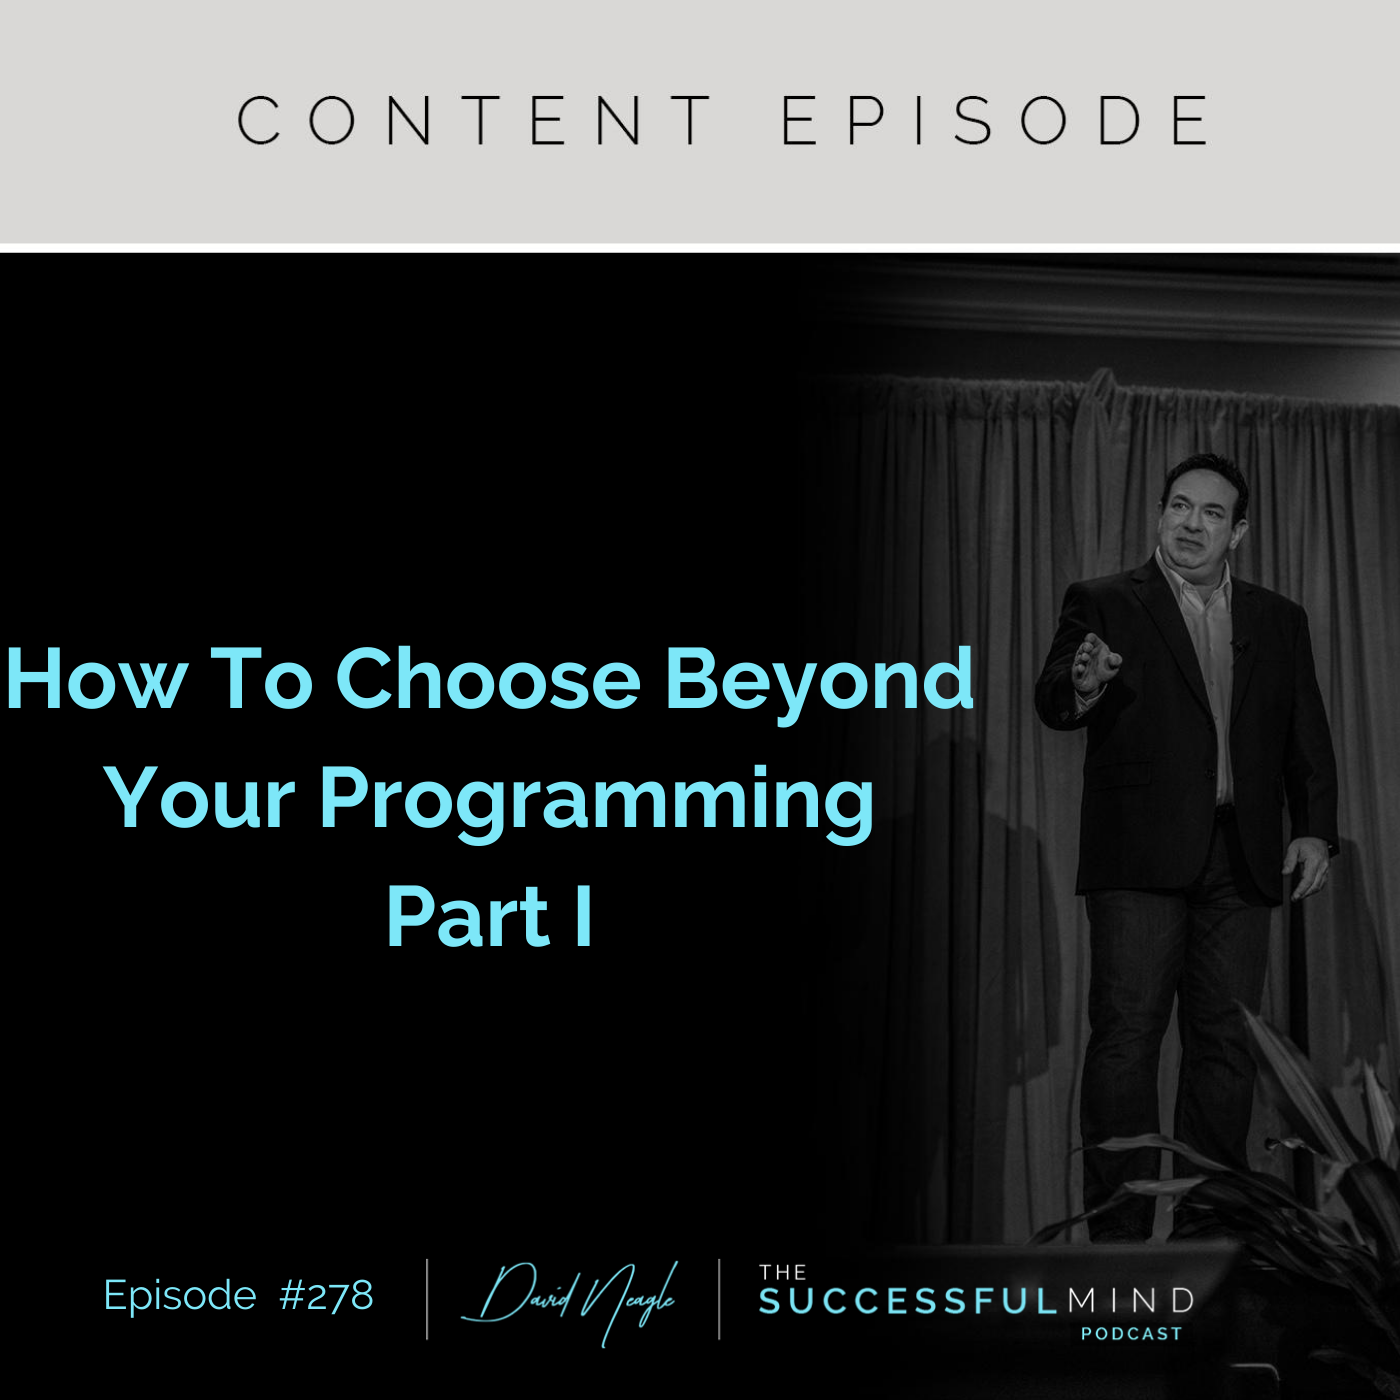 Successful Mind Podcast- Episode 278. The power of choice and how to choose beyond your programming.